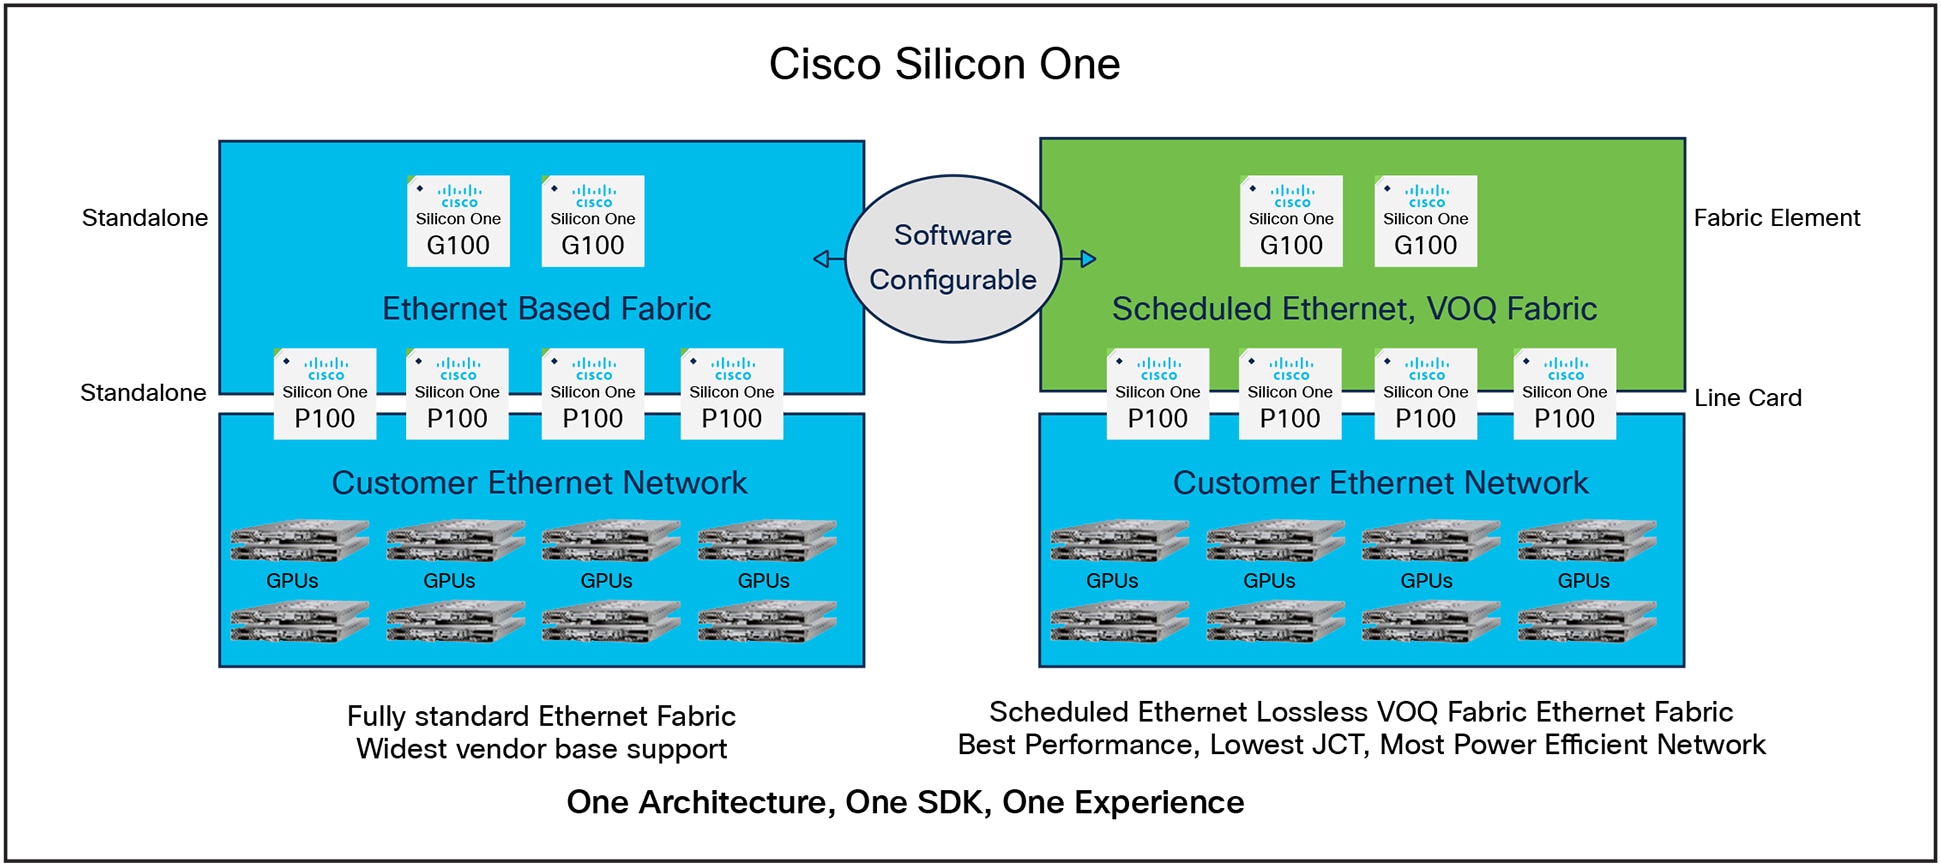 Fully scheduled fabric enables 2x more compute for the same network